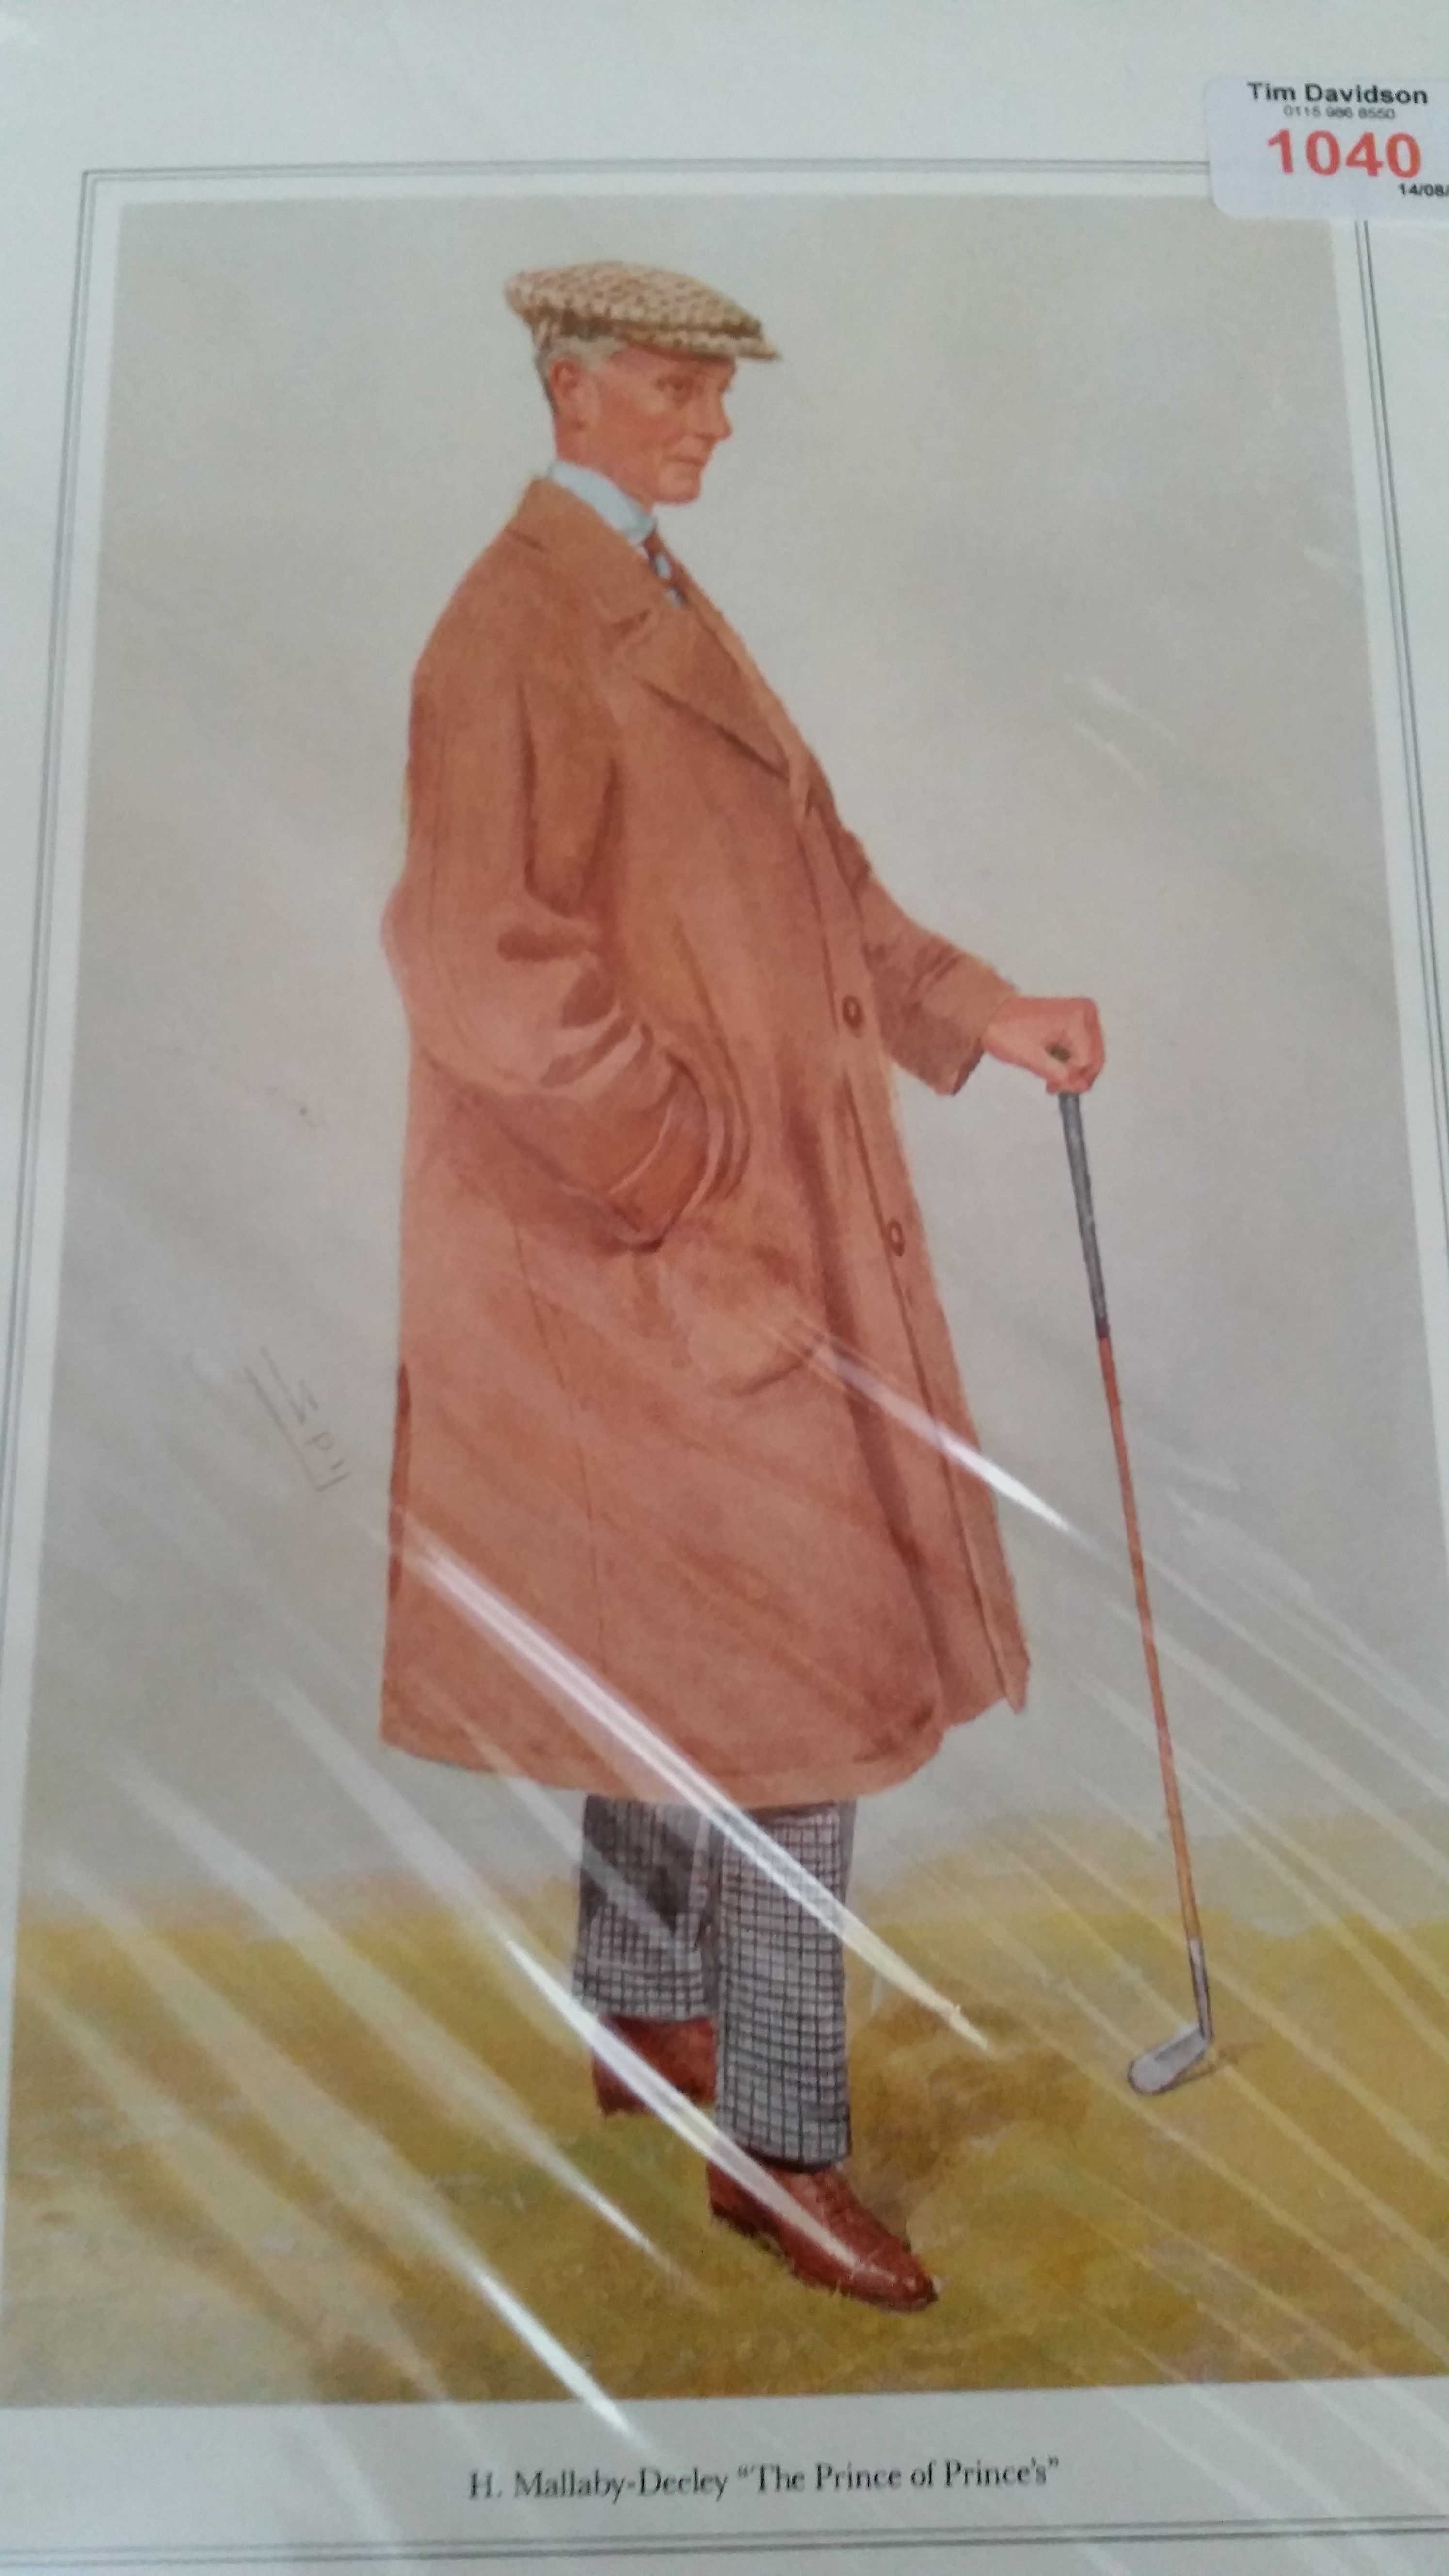 GOLF, colour prints, The Prince of Princes (Mallaby-Deeley) by Spy, as published in Vanity Fair,